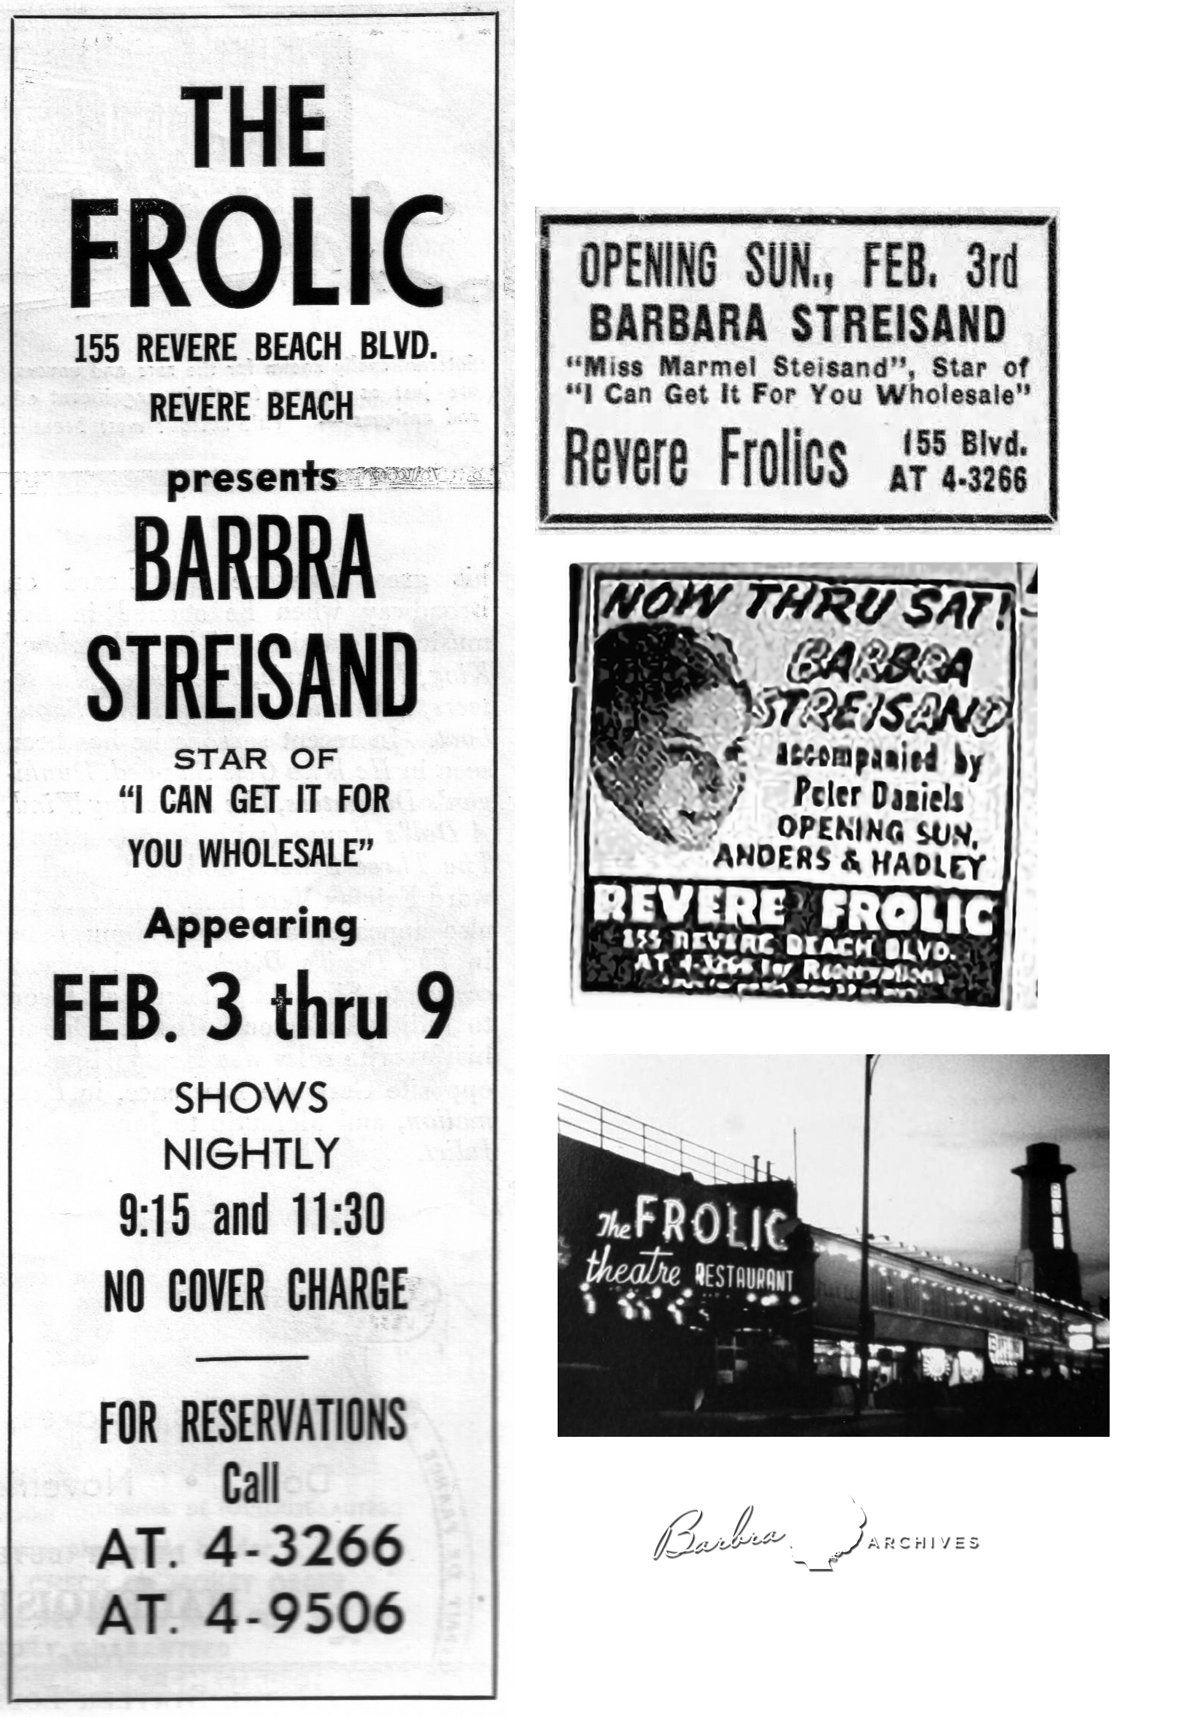 Newspaper ads for Barbra Streisand appearing at the Frolic in Revere, Mass.